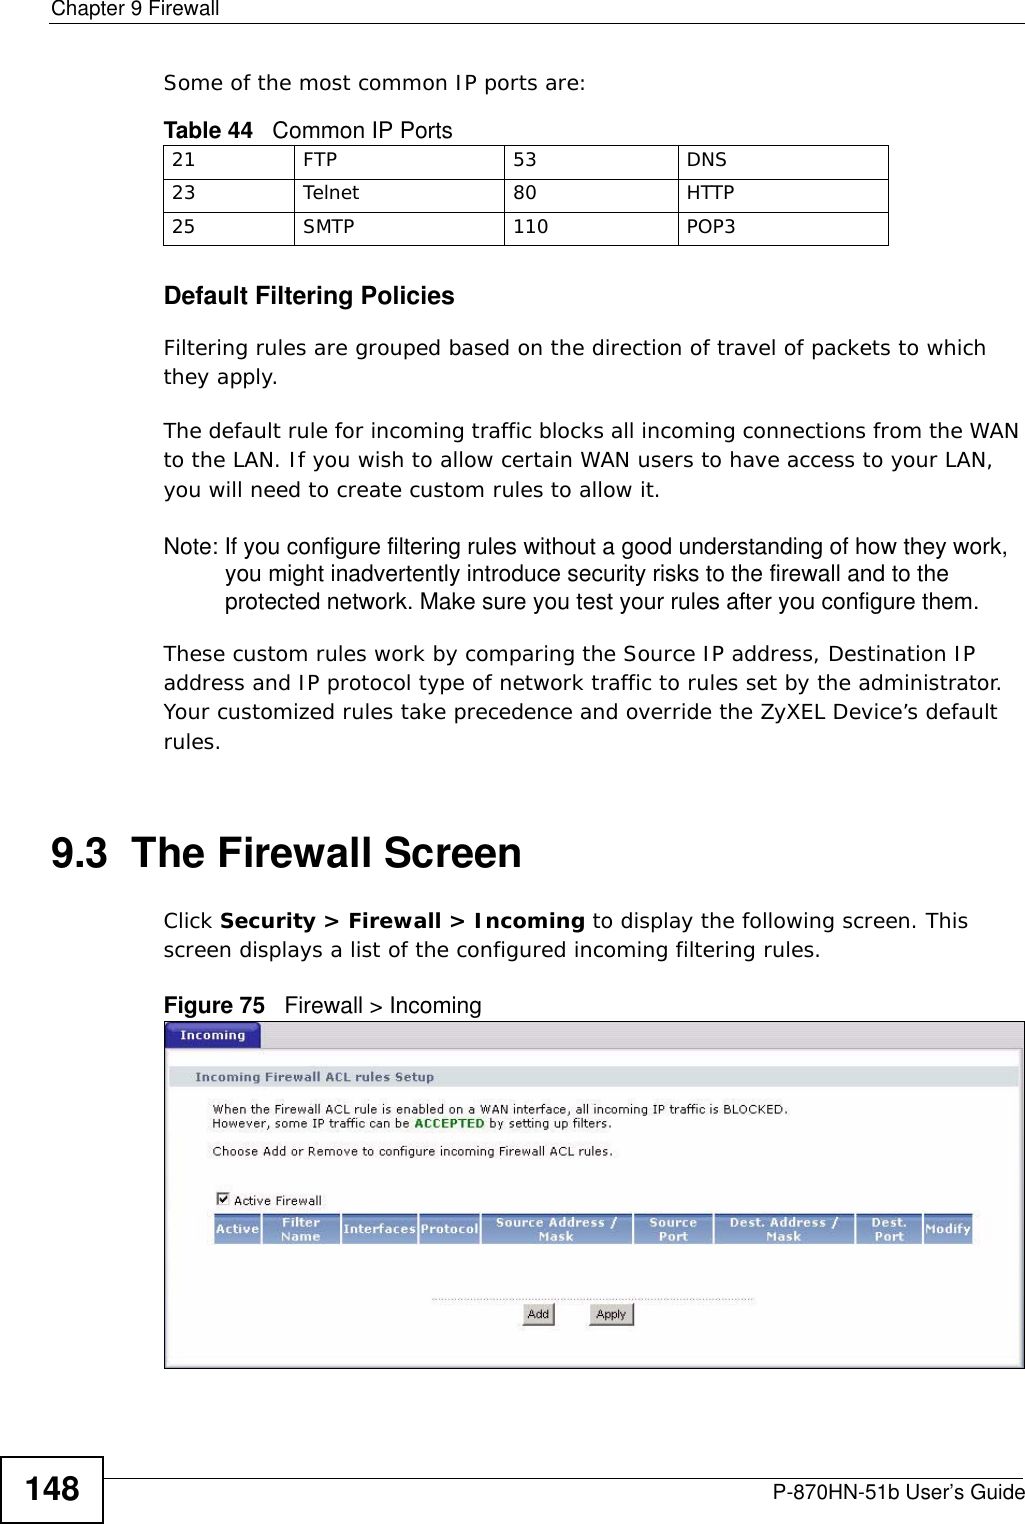 Chapter 9 FirewallP-870HN-51b User’s Guide148Some of the most common IP ports are: Default Filtering Policies Filtering rules are grouped based on the direction of travel of packets to which they apply. The default rule for incoming traffic blocks all incoming connections from the WAN to the LAN. If you wish to allow certain WAN users to have access to your LAN, you will need to create custom rules to allow it.Note: If you configure filtering rules without a good understanding of how they work, you might inadvertently introduce security risks to the firewall and to the protected network. Make sure you test your rules after you configure them.These custom rules work by comparing the Source IP address, Destination IP address and IP protocol type of network traffic to rules set by the administrator. Your customized rules take precedence and override the ZyXEL Device’s default rules. 9.3  The Firewall ScreenClick Security &gt; Firewall &gt; Incoming to display the following screen. This screen displays a list of the configured incoming filtering rules. Figure 75   Firewall &gt; Incoming Table 44   Common IP Ports21 FTP 53 DNS23 Telnet 80 HTTP25 SMTP 110 POP3